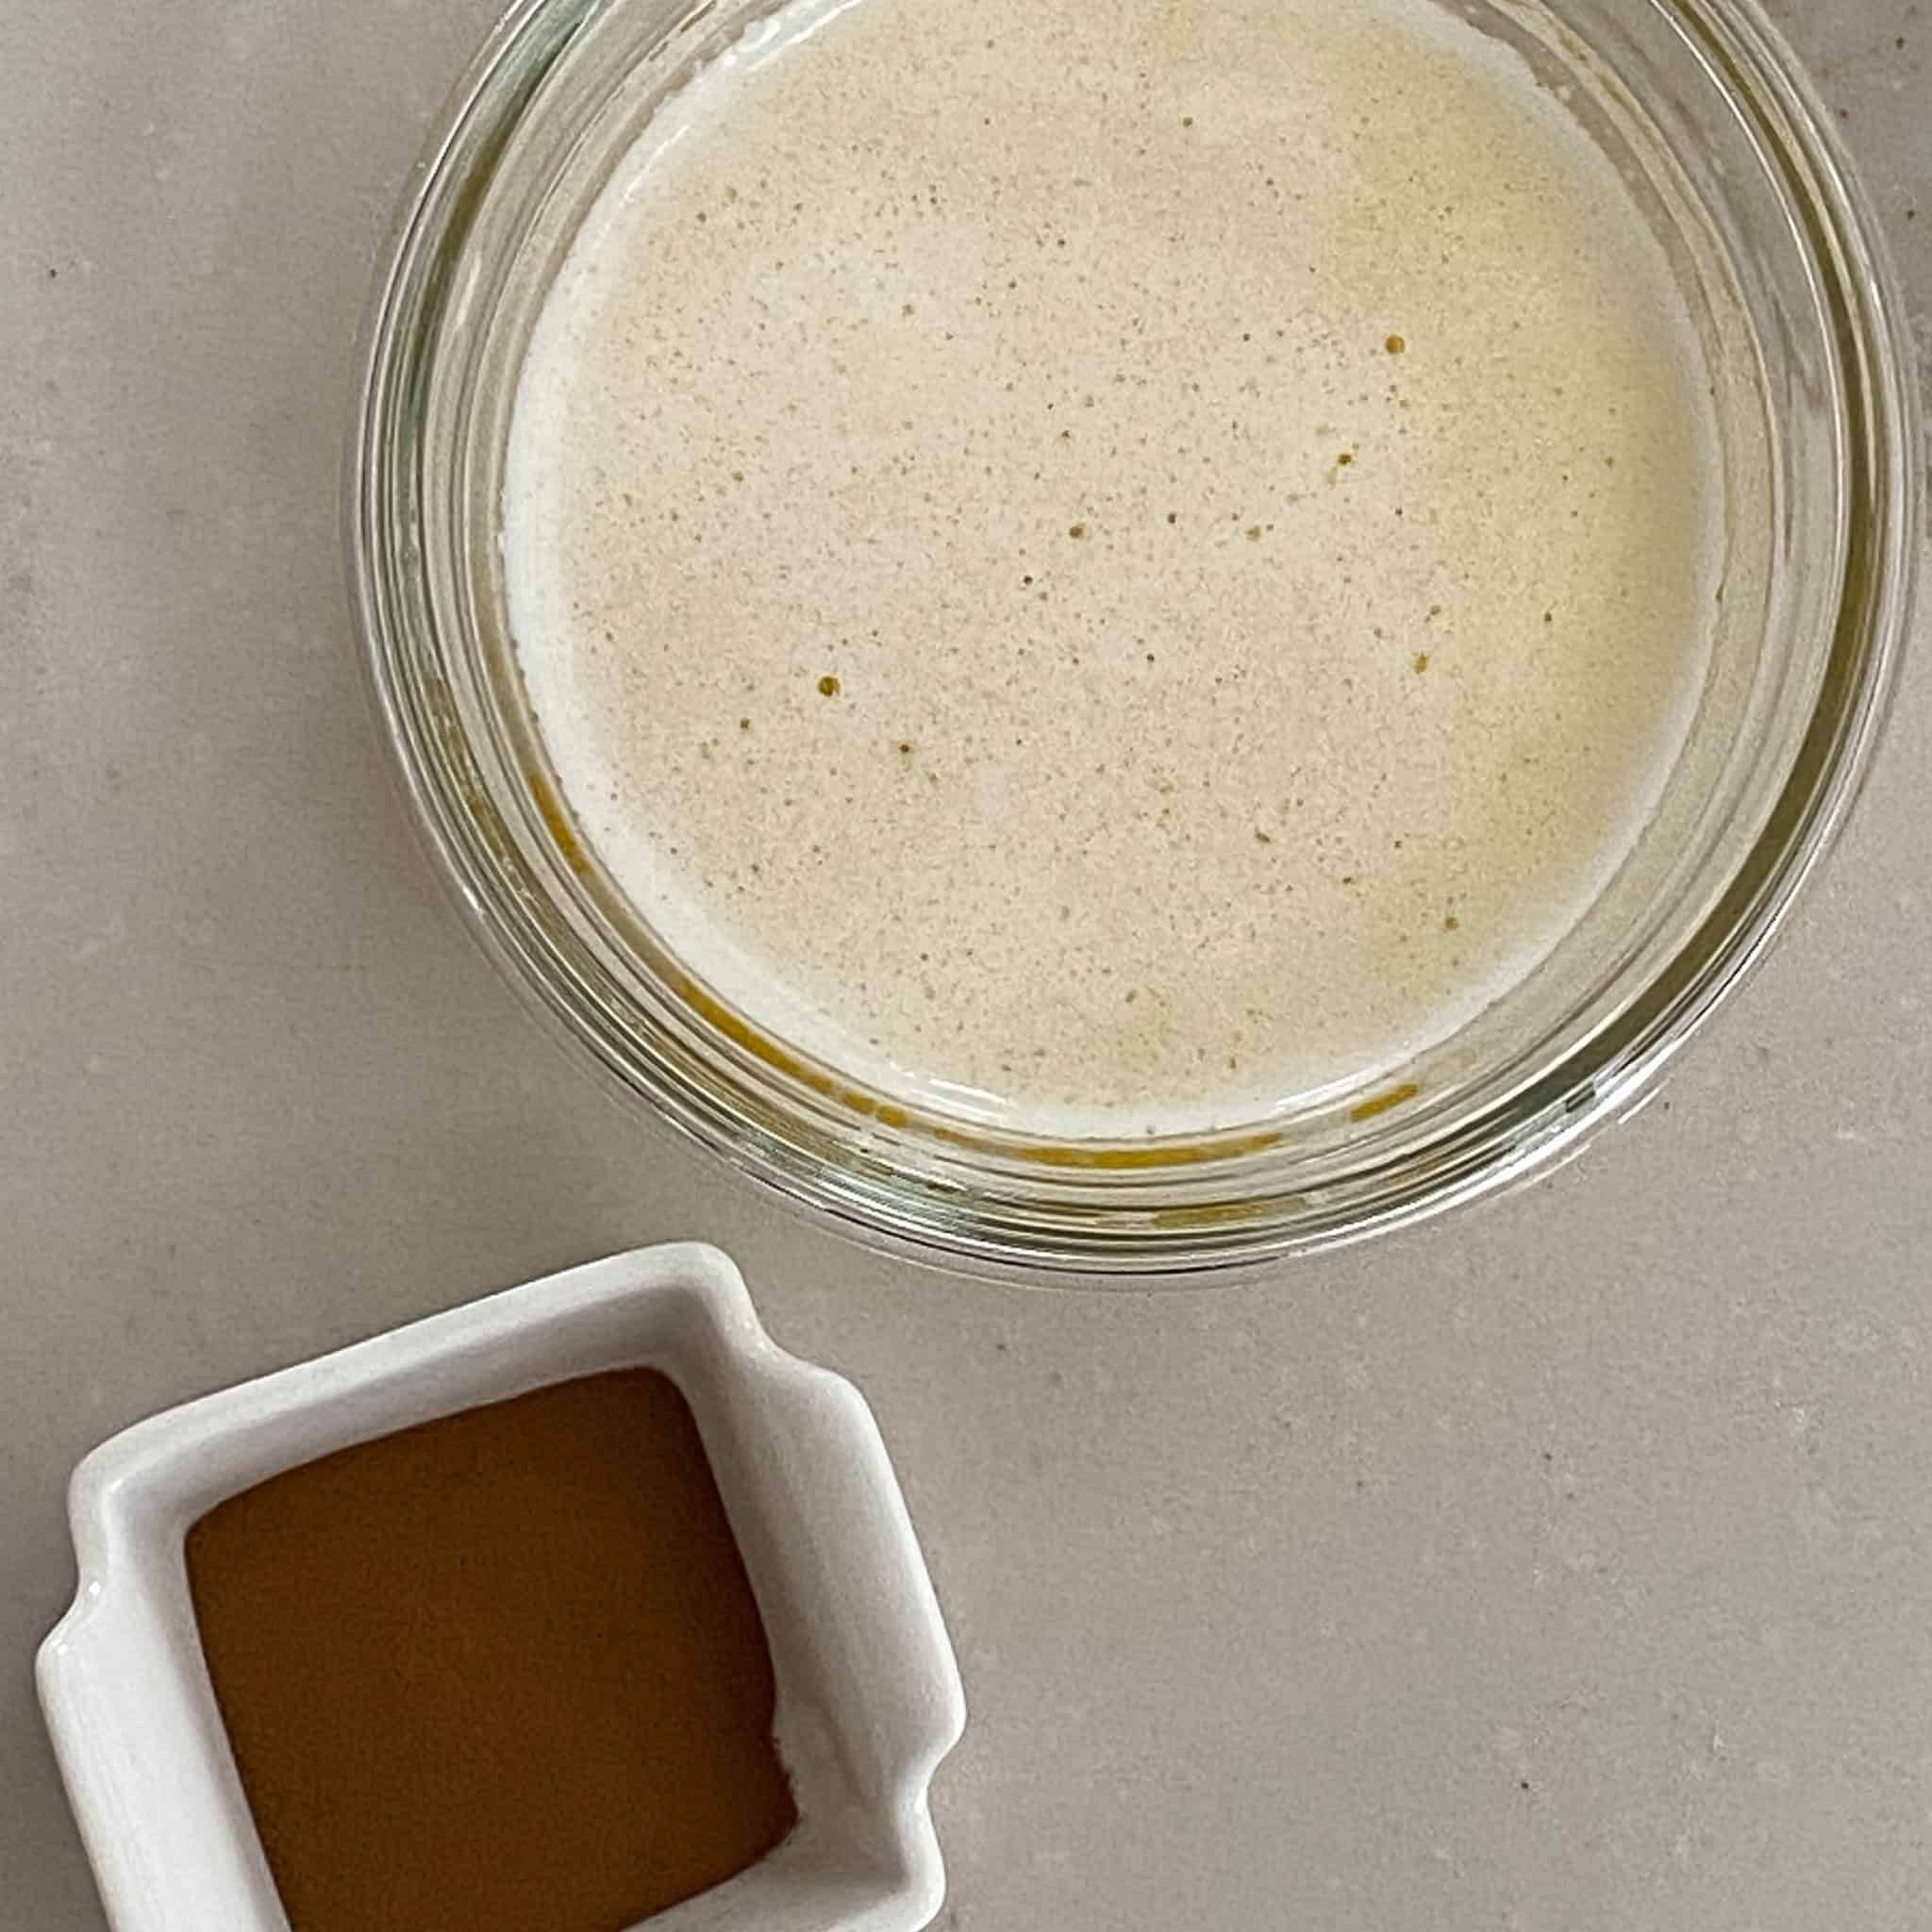 Espresso powder in a small white square dish and melted butter in a glass bowl.